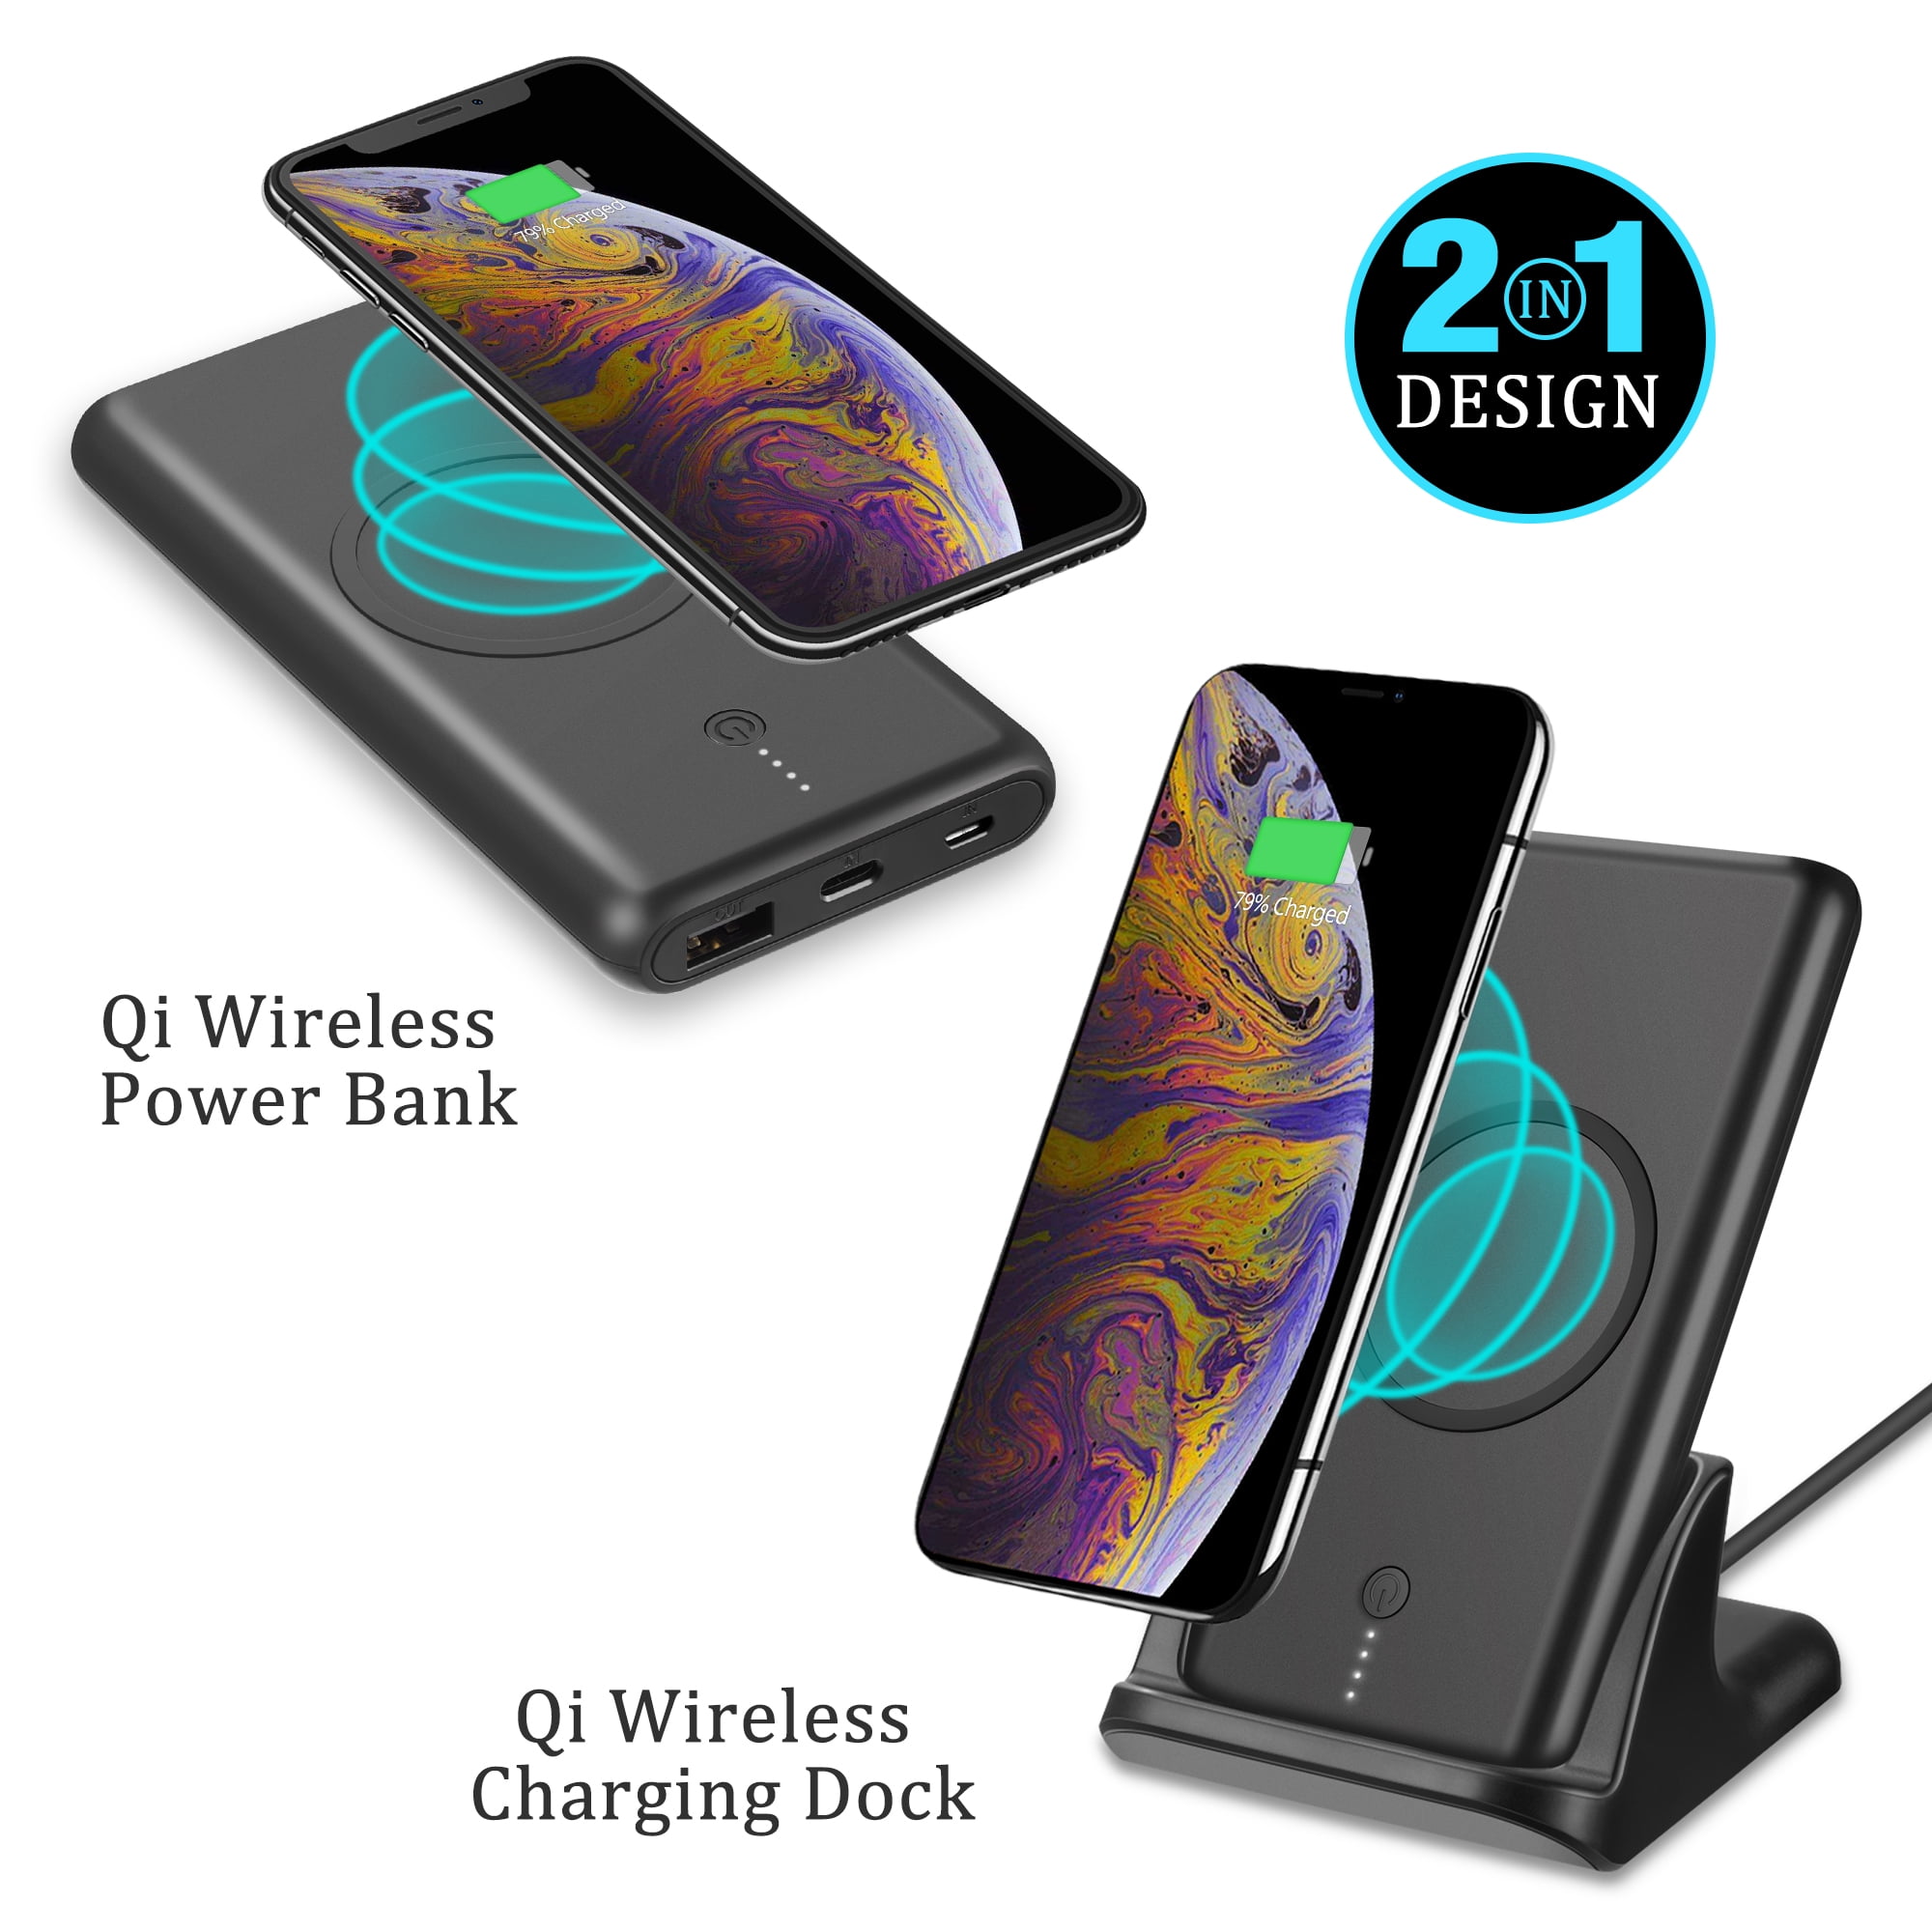 Universal Wireless Charger Power Bank Luxmo Wireless Charging Pad Stand For Samsung Galaxy S8 S8 Plus Note 8 Iphone Xs Max Xr Xs X 8 8 Plus